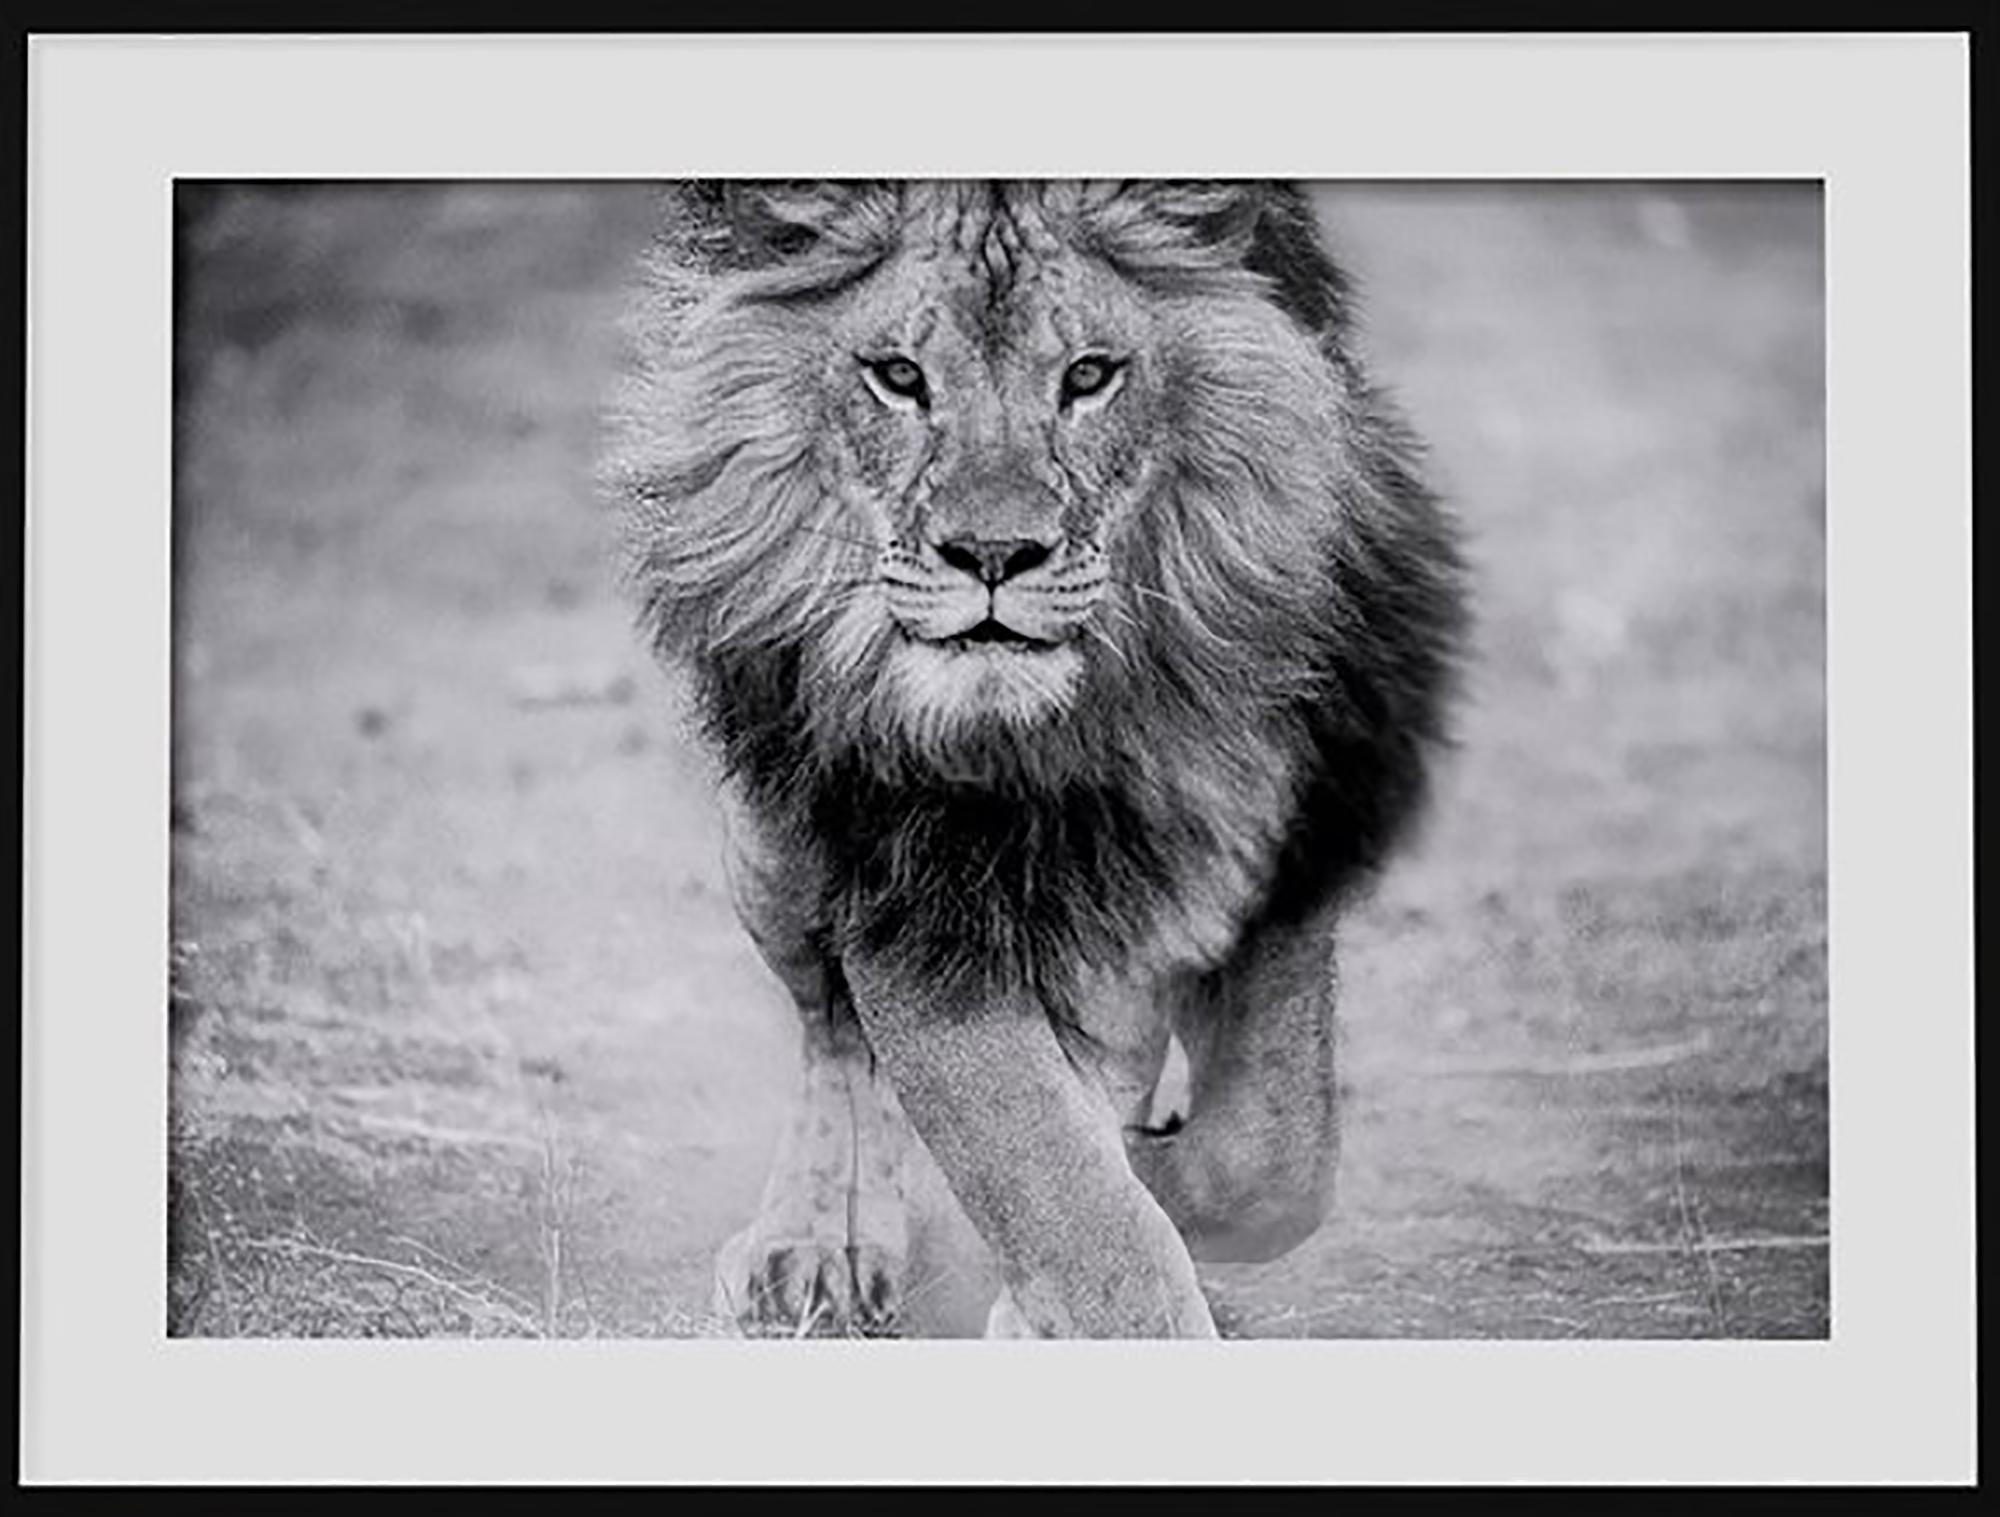 lion black and white